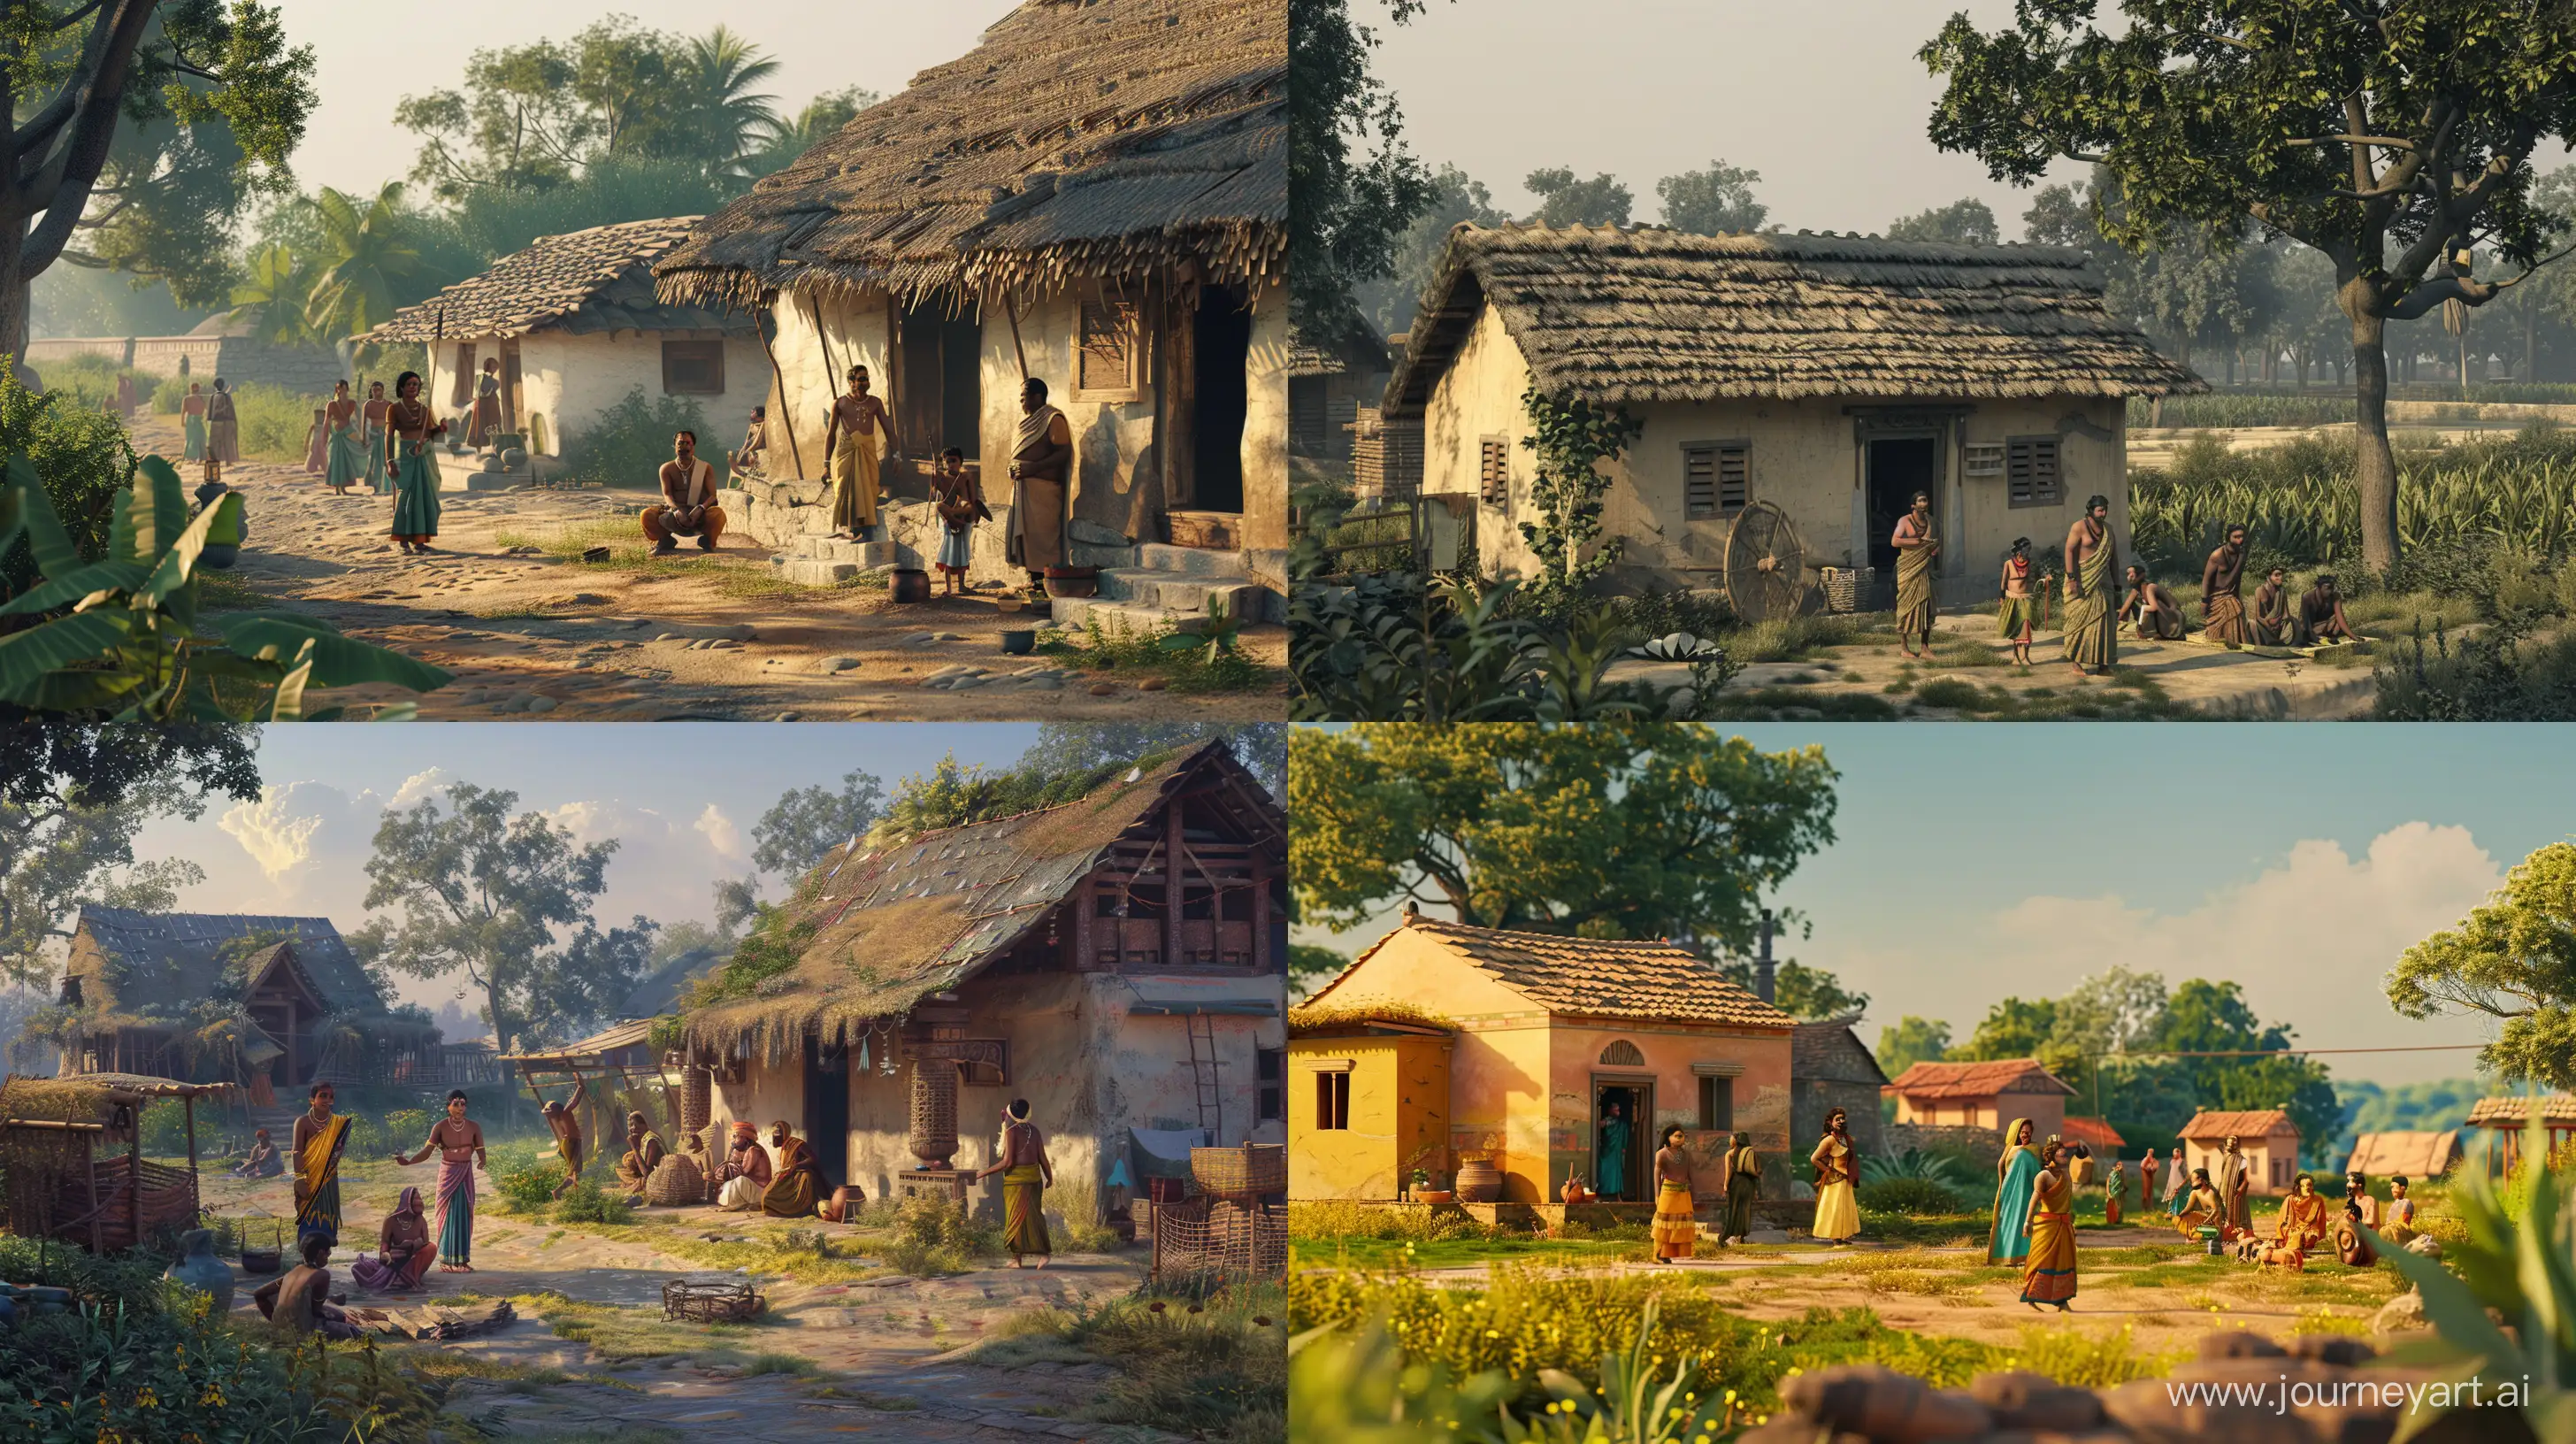 Realistic images depicting the people from ancient Indian times peacefully living, village houses, people outside the house, happy face, intricate details, tranquil background, 8k quality --ar 16:9 